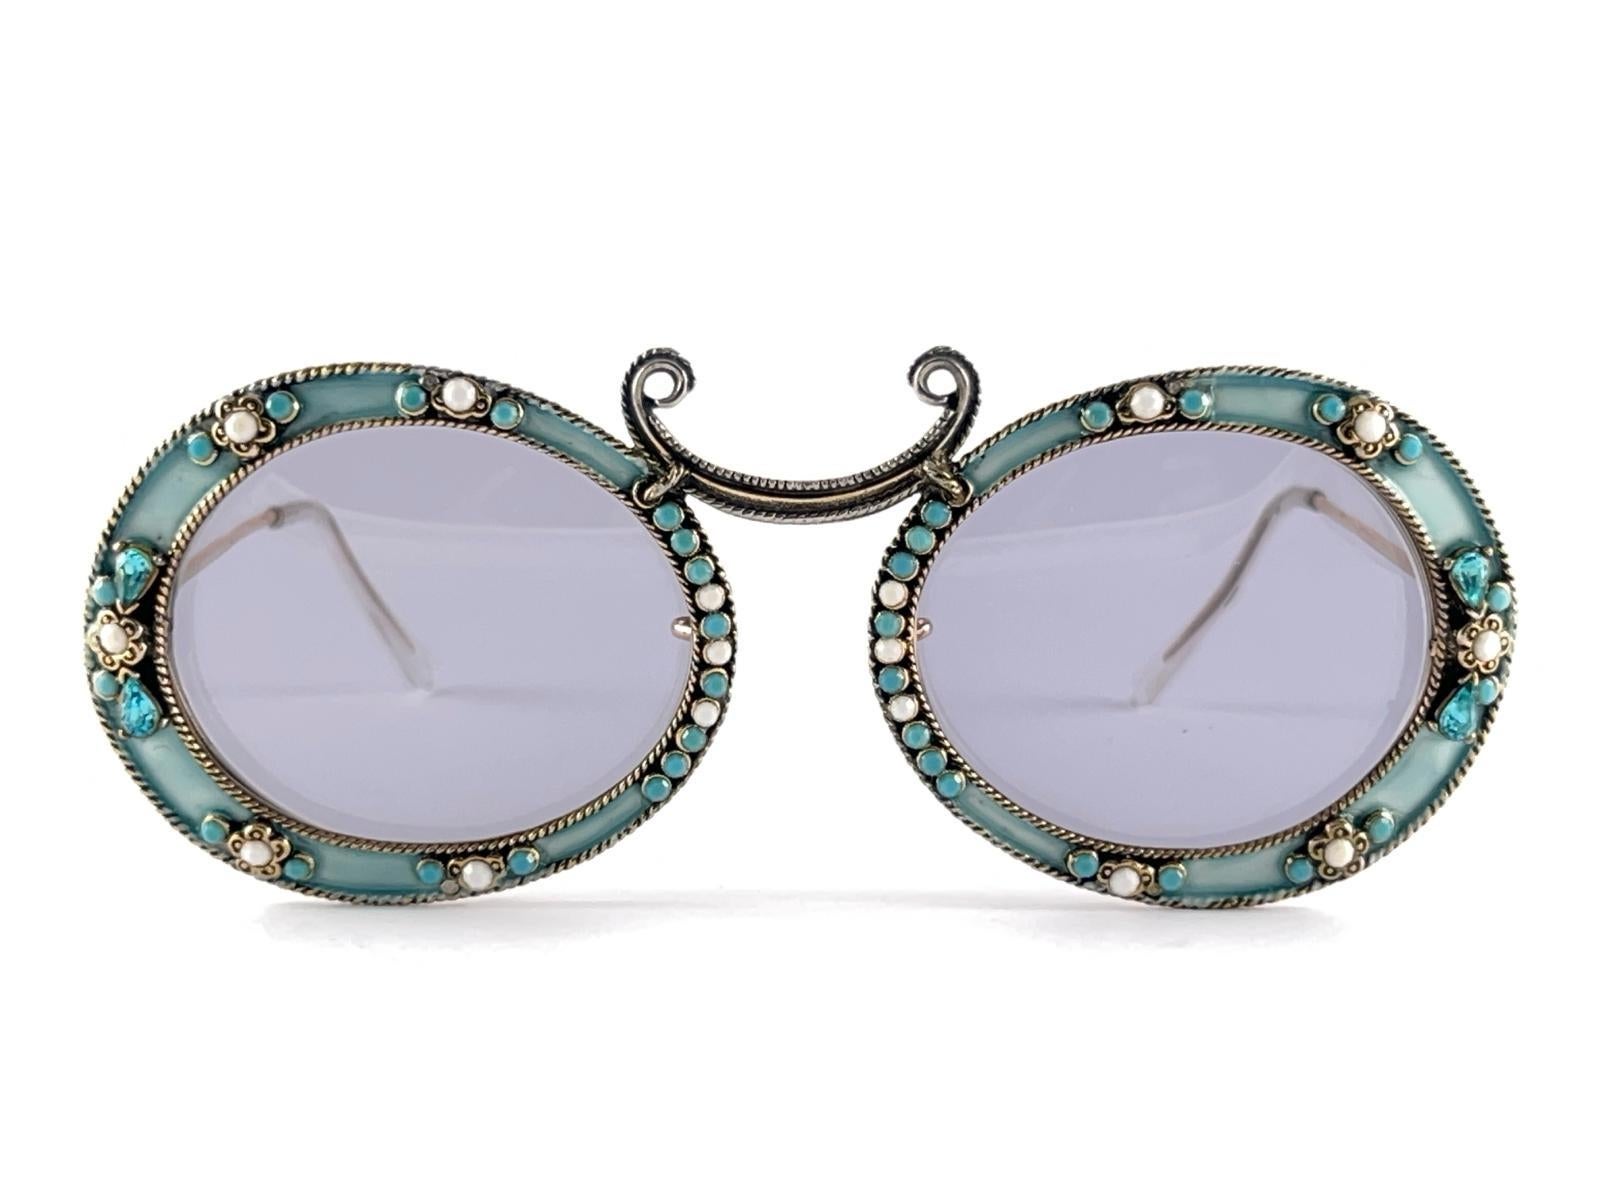 Ultra Rare 1960 Christian Dior Enamel Jewelled by Tura Collector Item Sunglasses For Sale 3